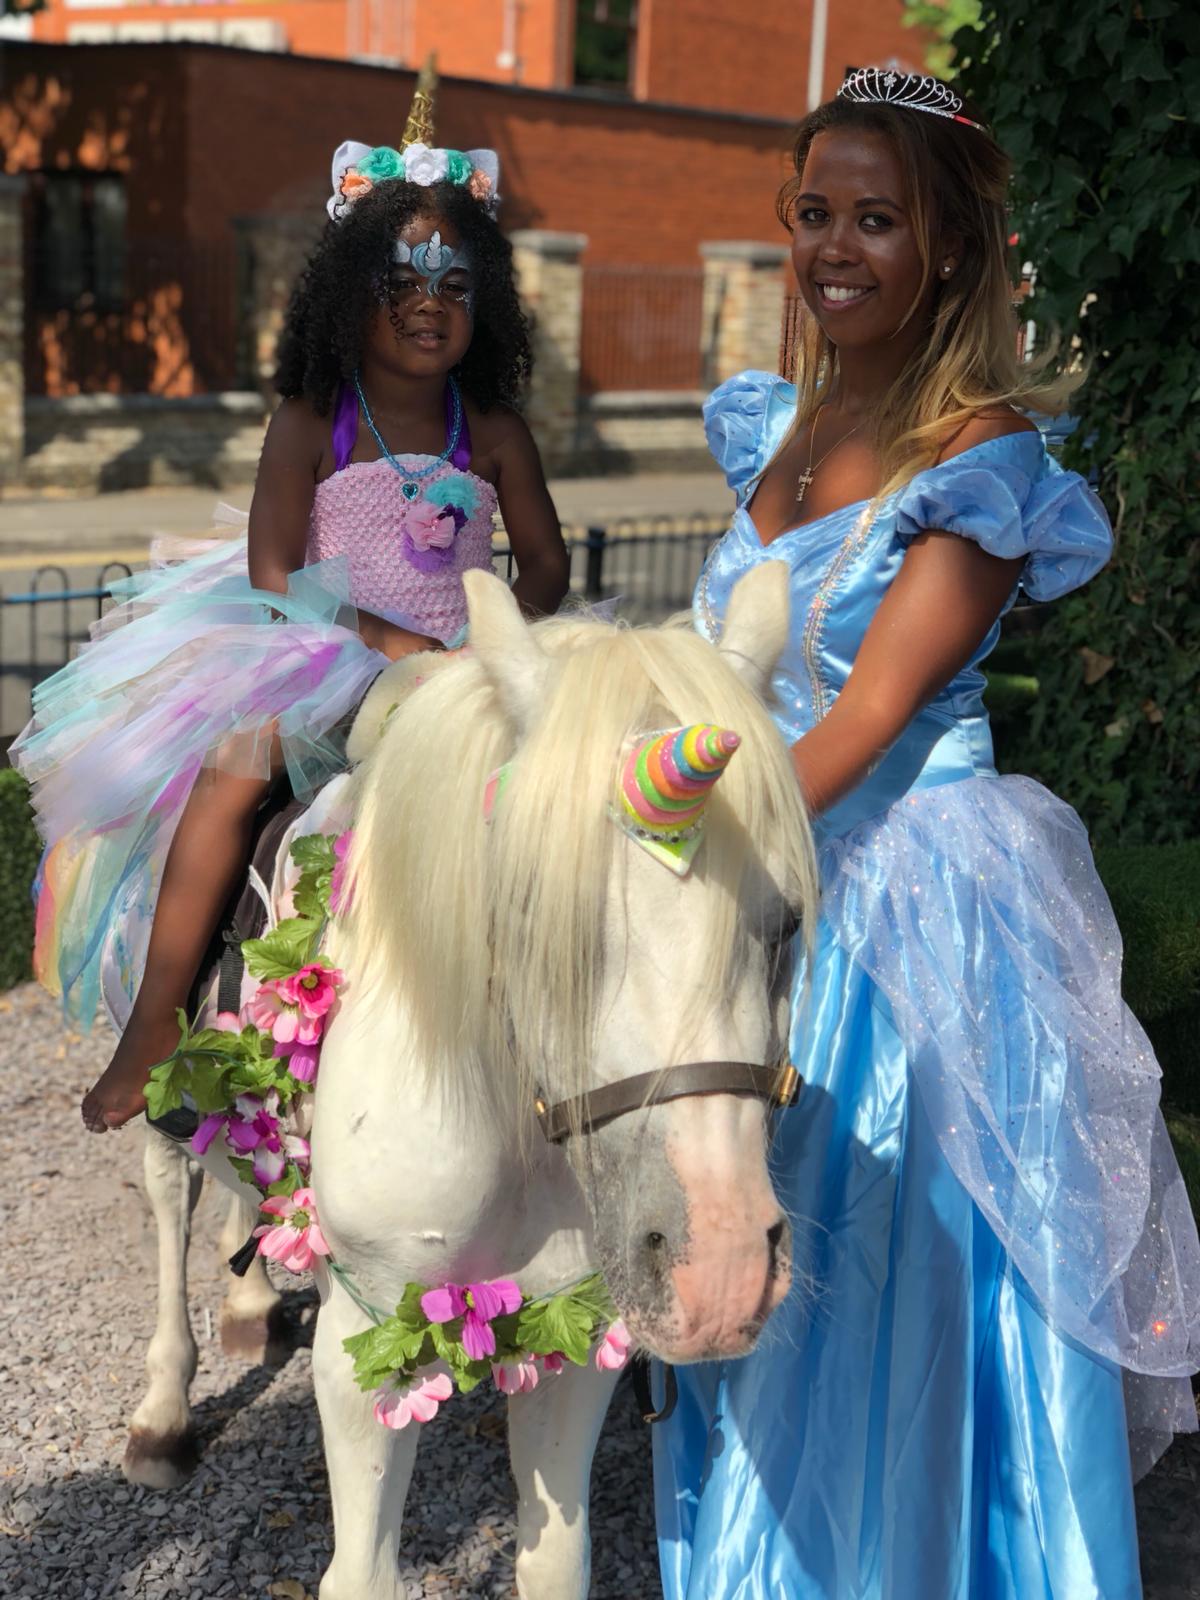 Pony at my party. Pony rides at your party essex | pony at my party gallery image 4